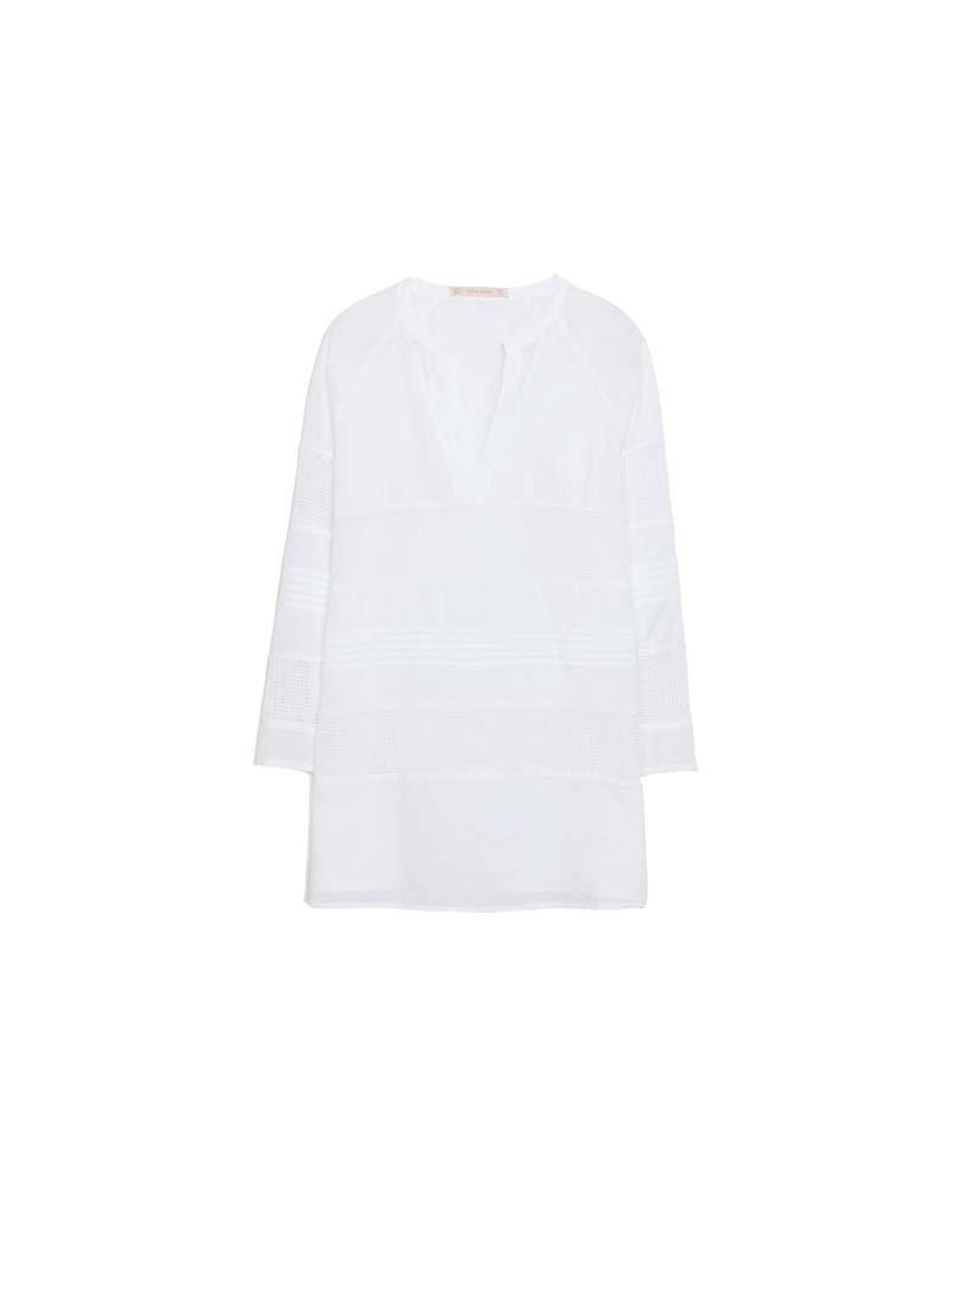 <p>Team the skirt with a white cotton top like this from <a href="http://www.zara.com/uk/en/woman/shirts/combination-cotton-voile-blouse-c358004p1843006.html">Zara</a>, £25.99</p>